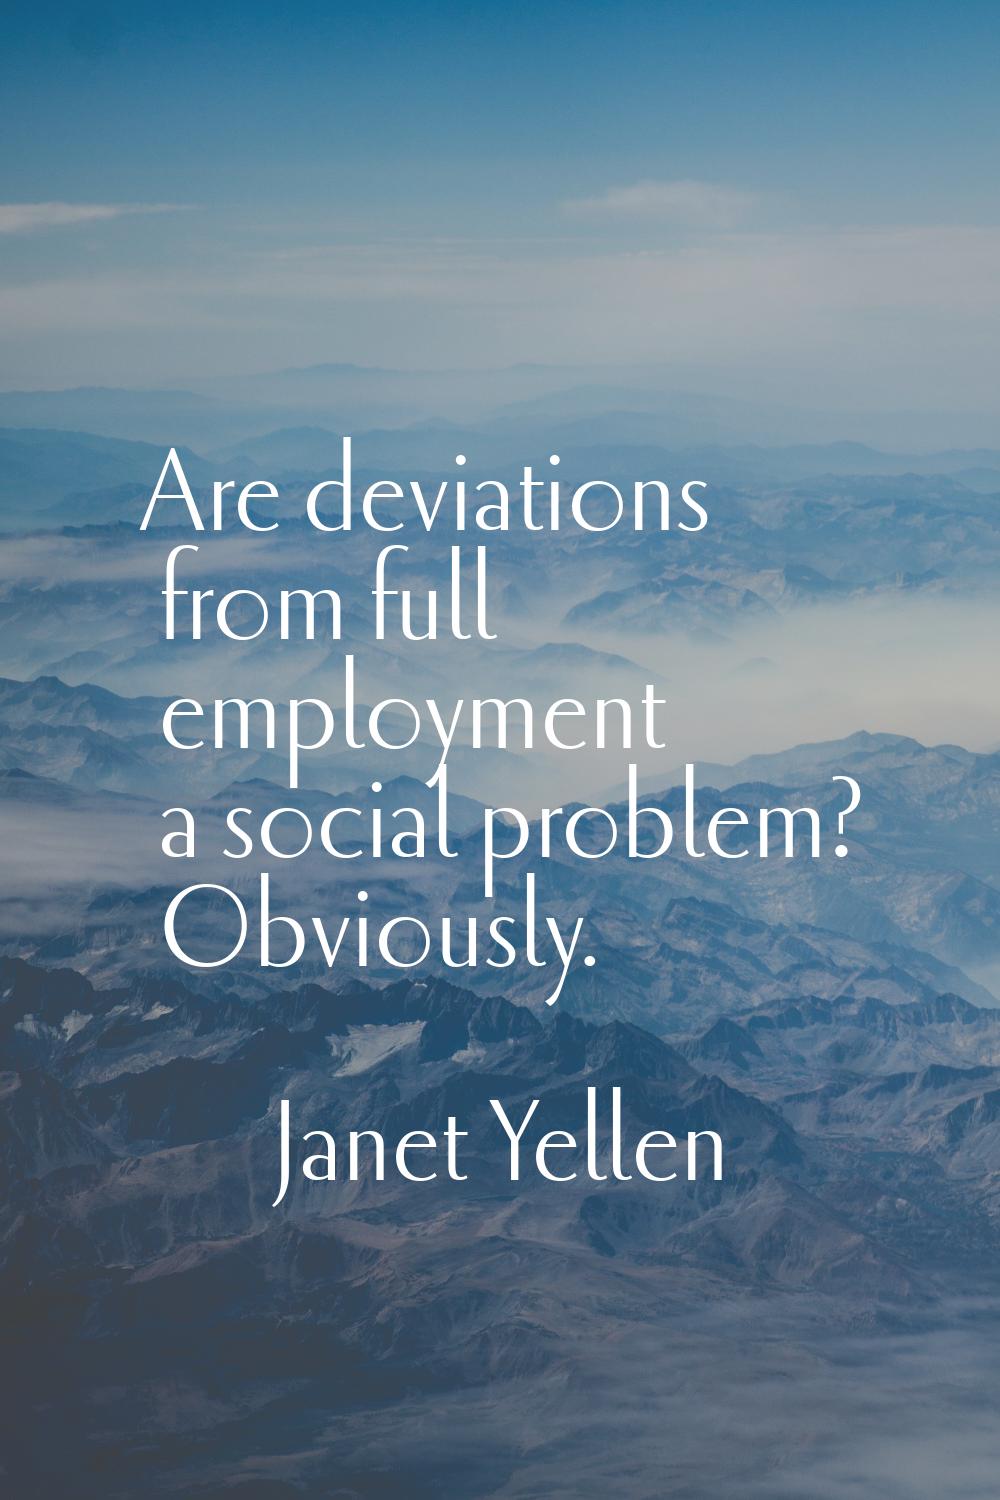 Are deviations from full employment a social problem? Obviously.